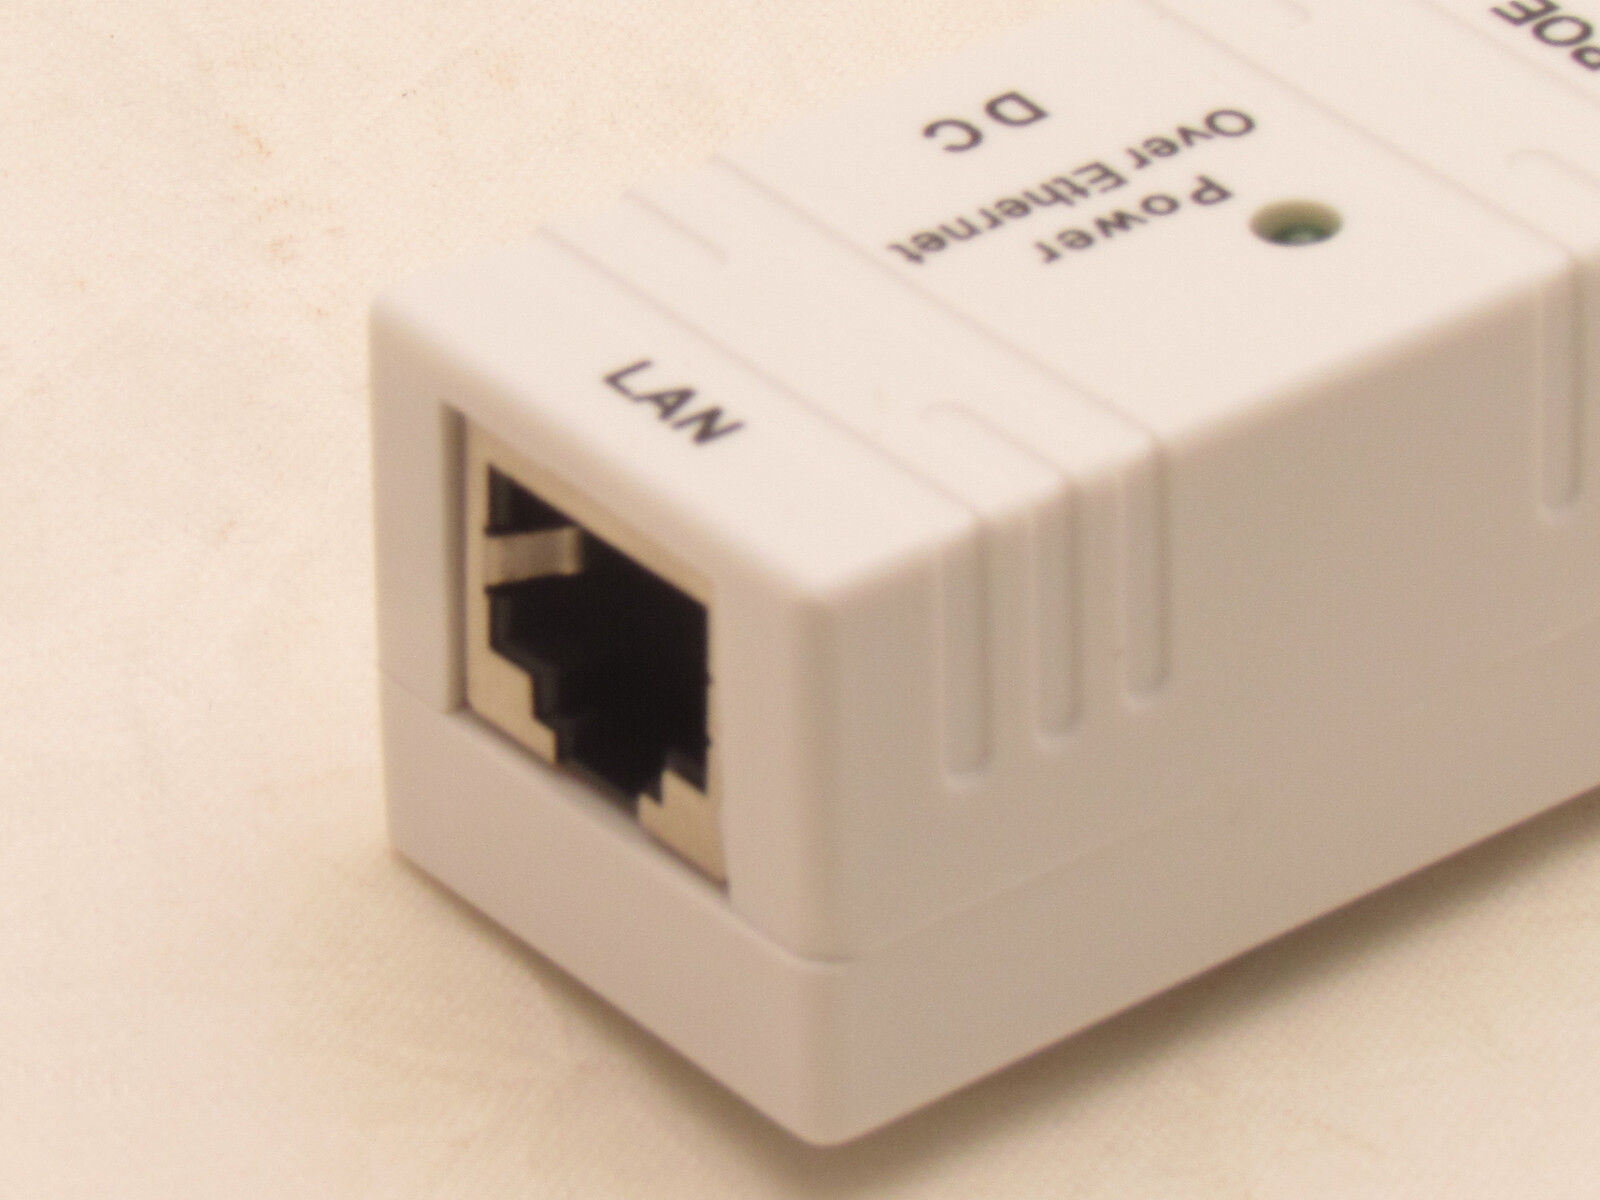 10 X POE Injector Splitter over Ethernet Adapter IP Camera LAN Network DC White LAswitch Does Not Apply - фотография #8